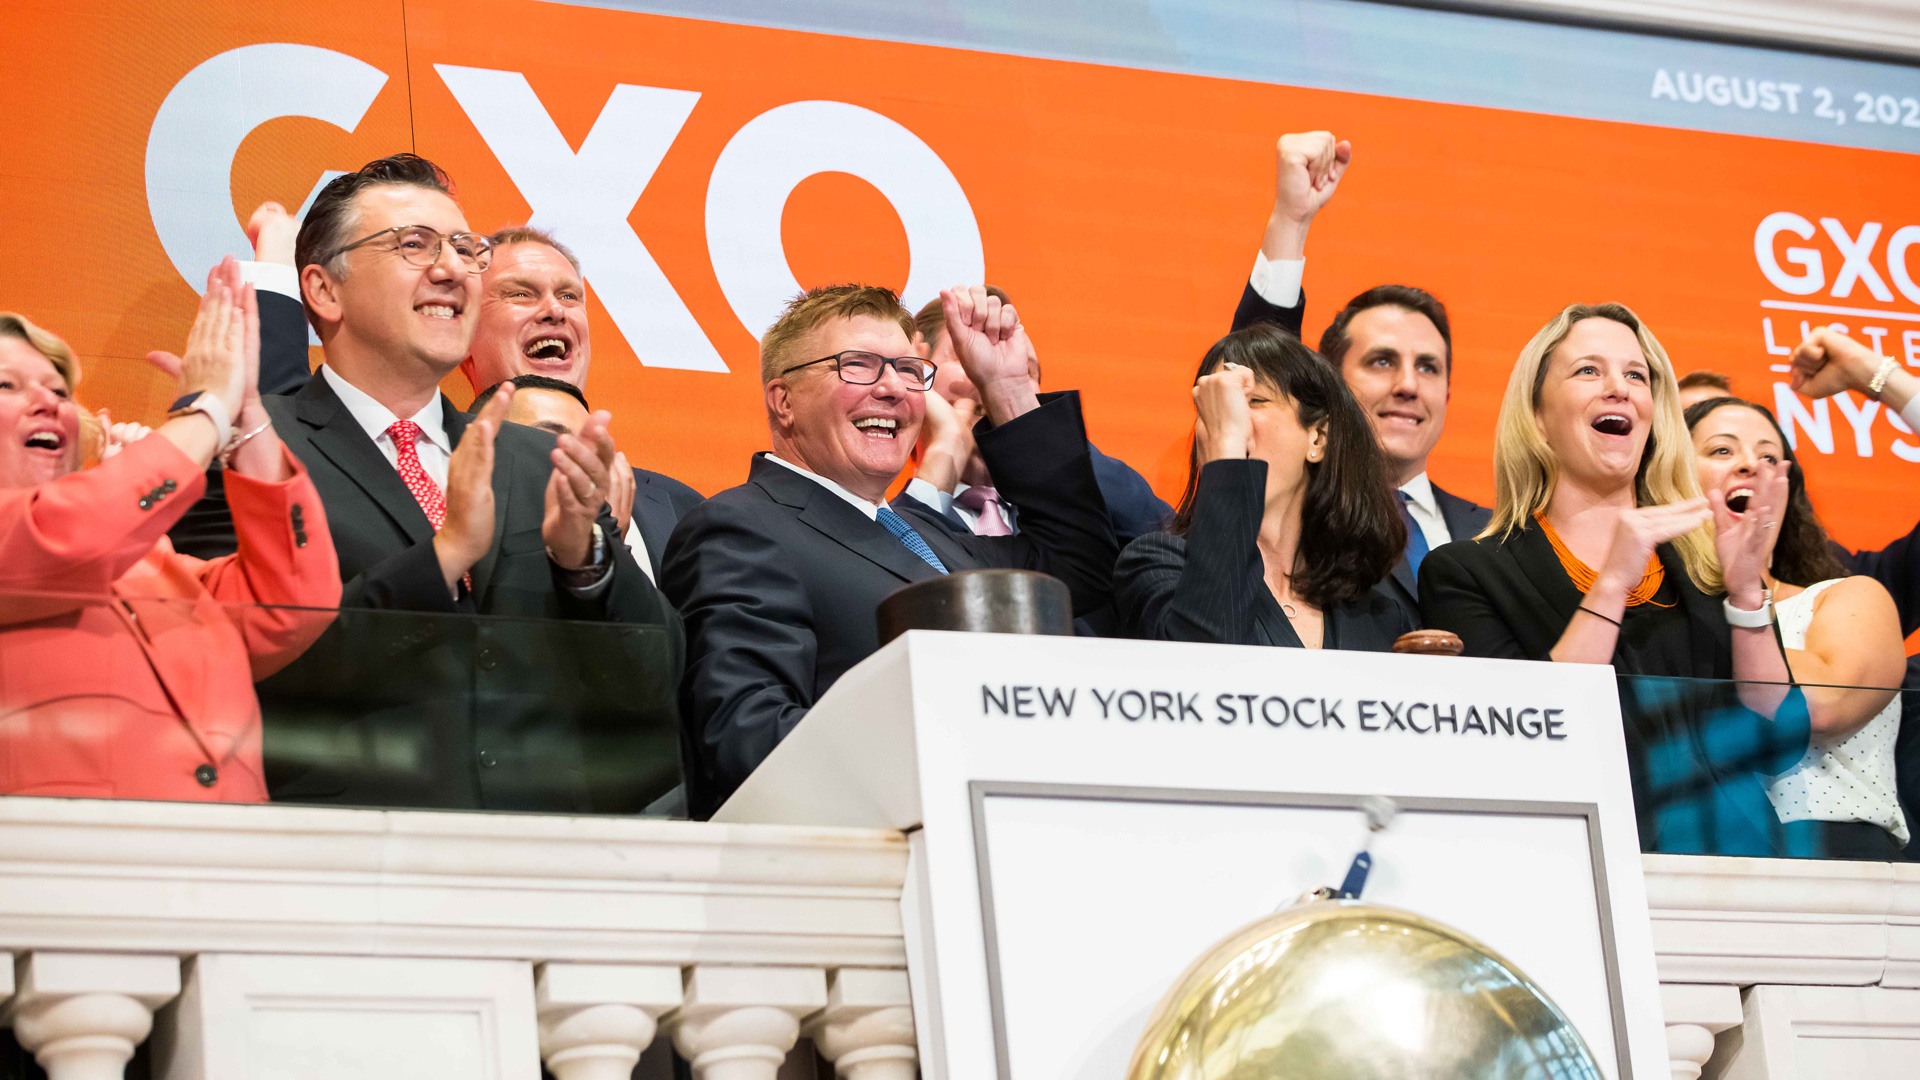 Malcolm Wilson rings the NYSE Opening Bell